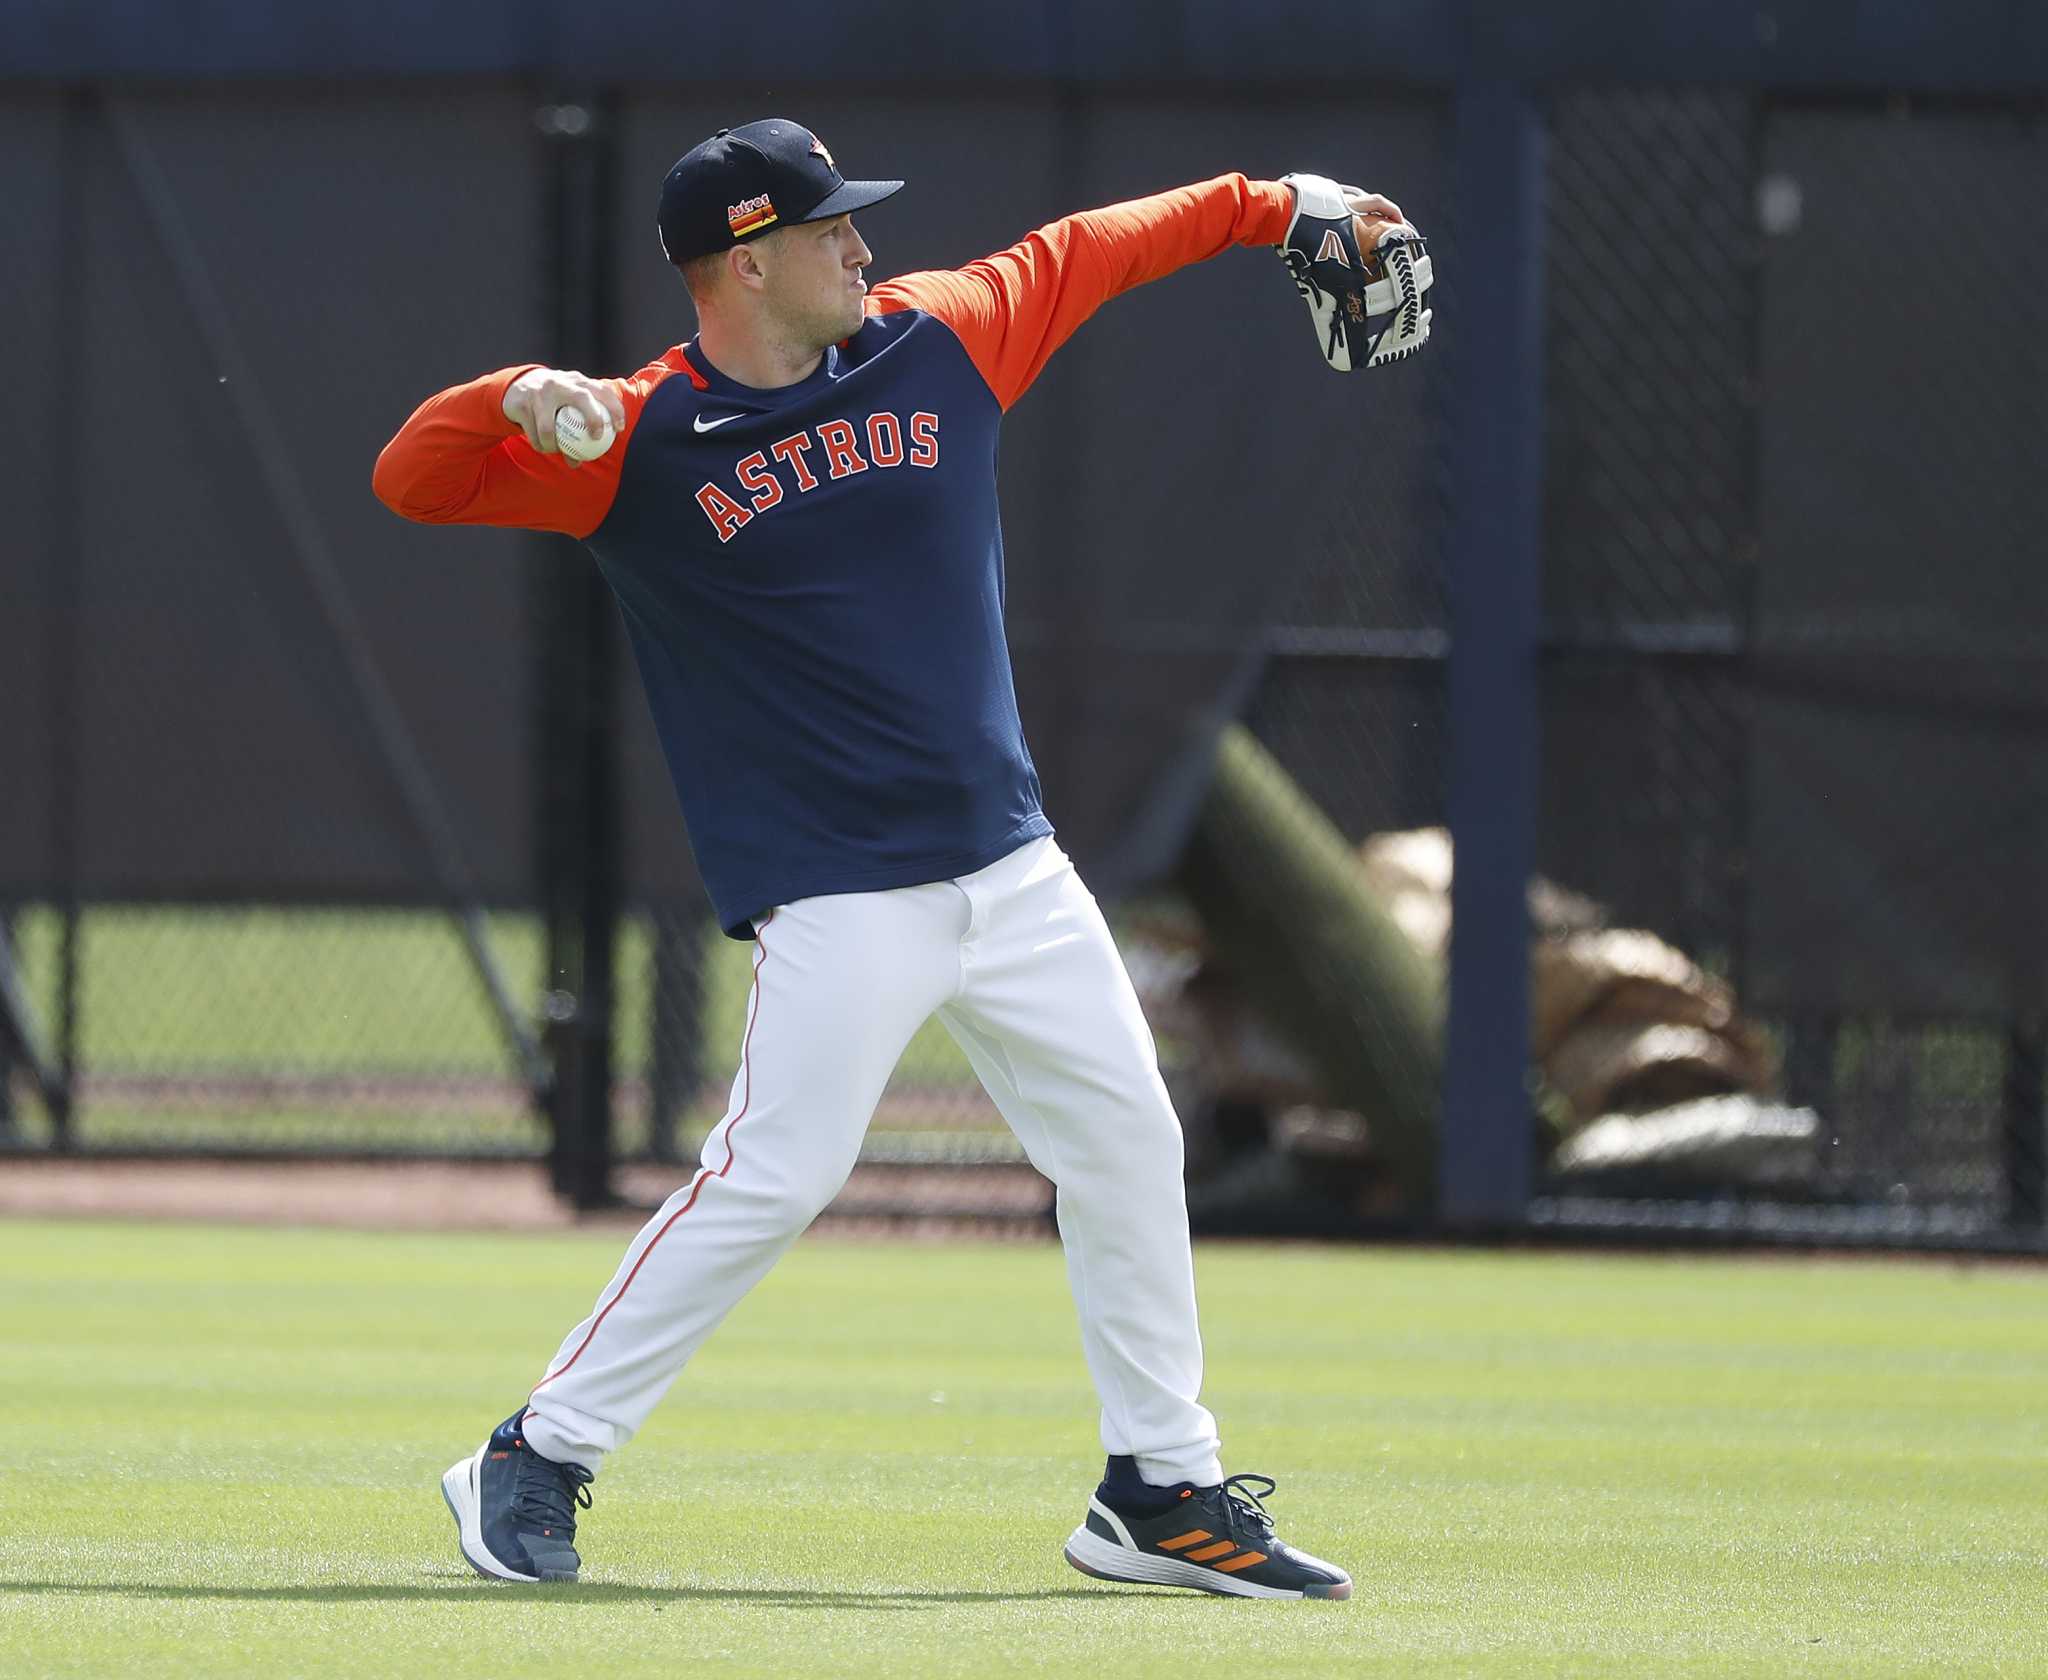 Alex Bregman at full strength and ready for return to Astros